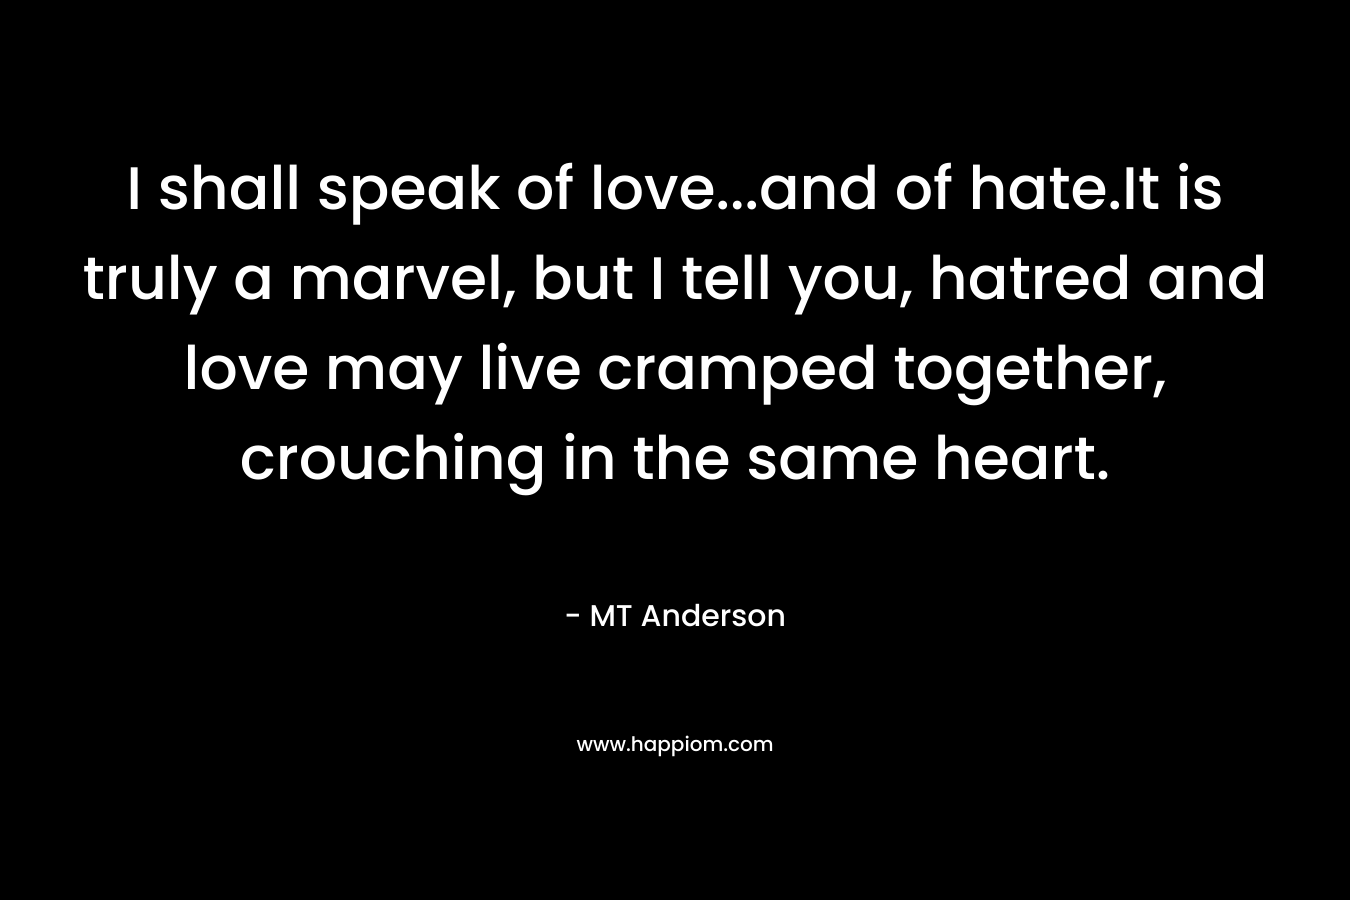 I shall speak of love...and of hate.It is truly a marvel, but I tell you, hatred and love may live cramped together, crouching in the same heart.